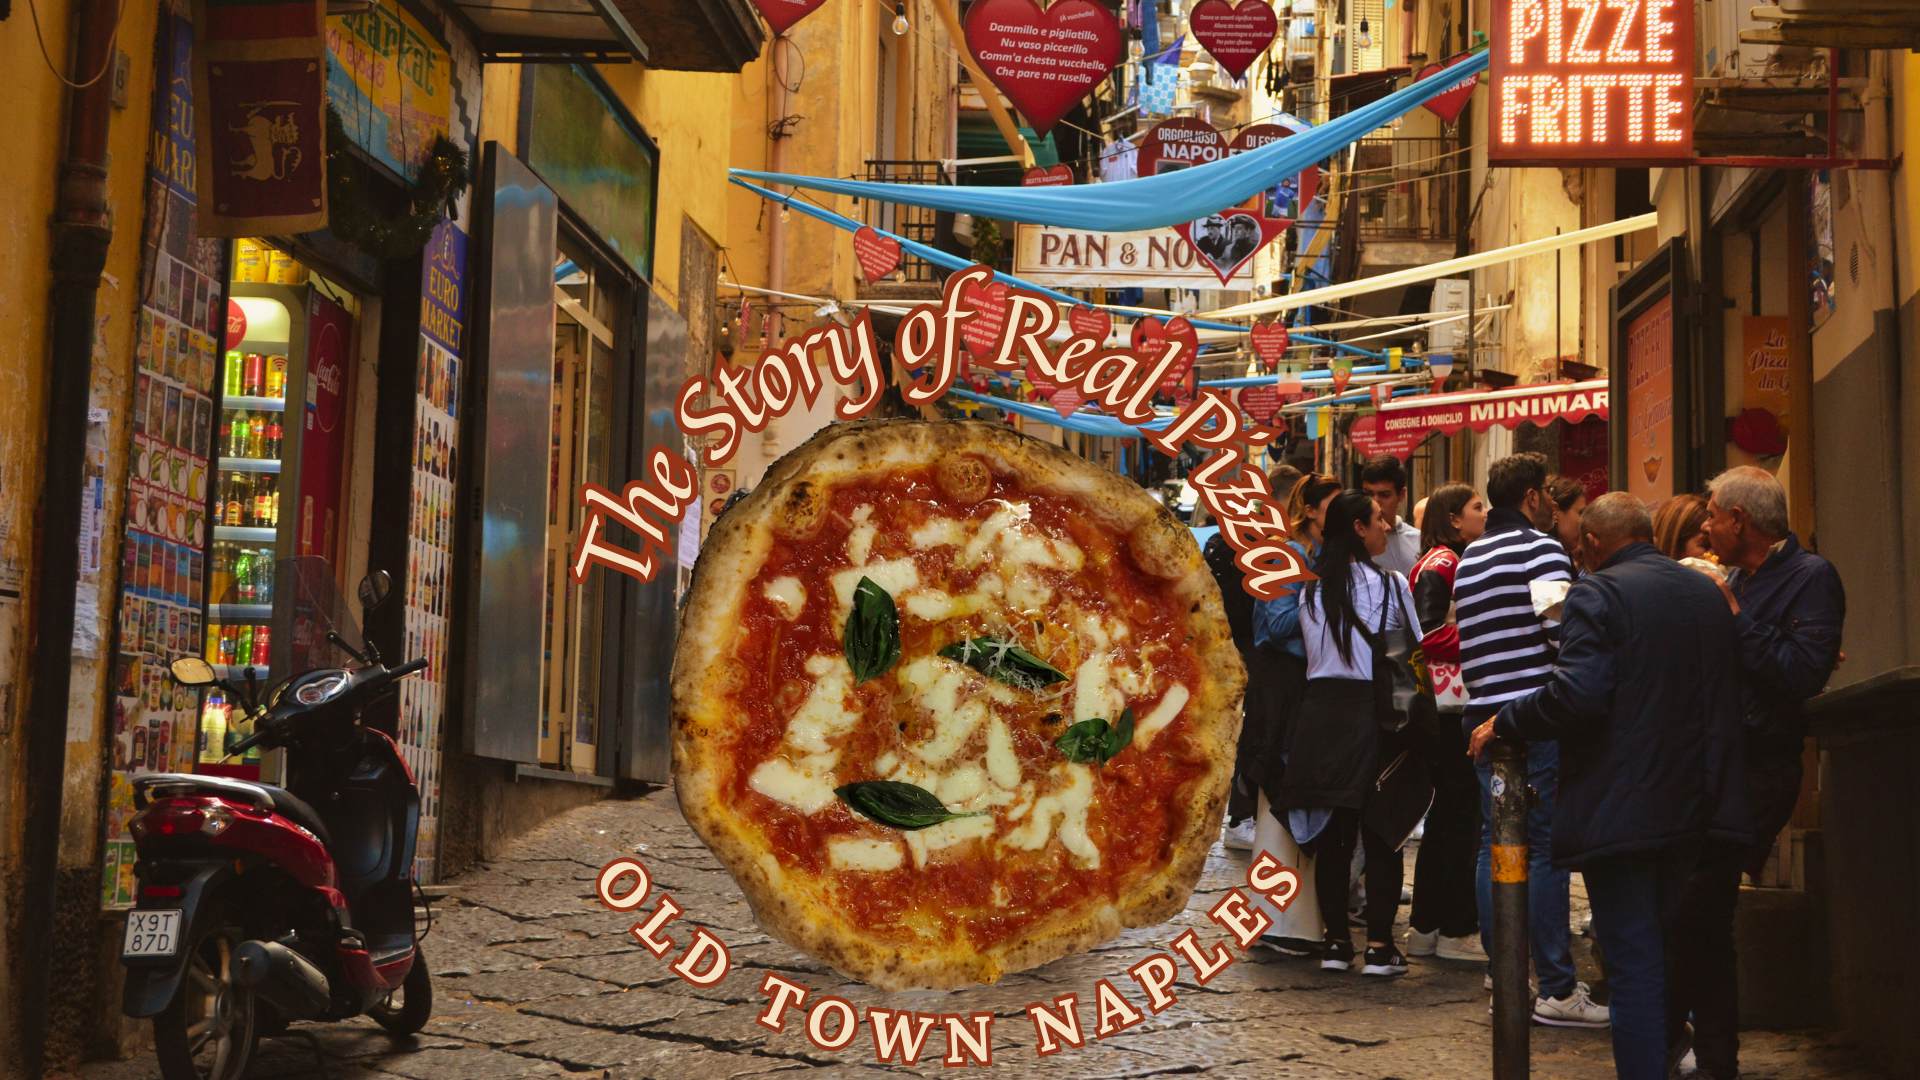 Old Town Naples: The Story of Real Pizza image